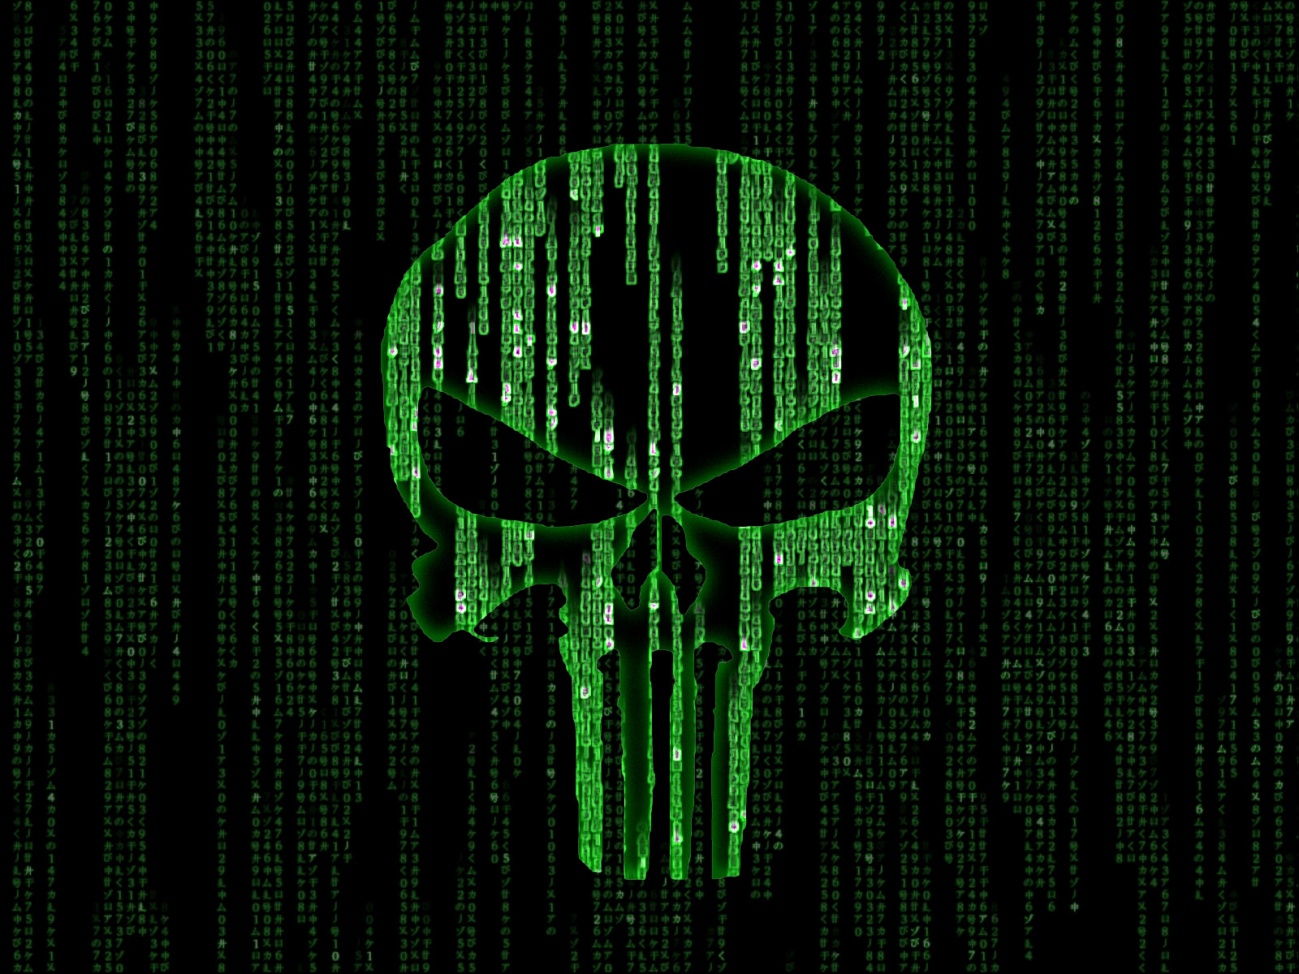 http://creativx.net/forums/attachments/linux-themes/44993d1329532232-linux-matrix-binary-extreme-edition-punisher.jpg